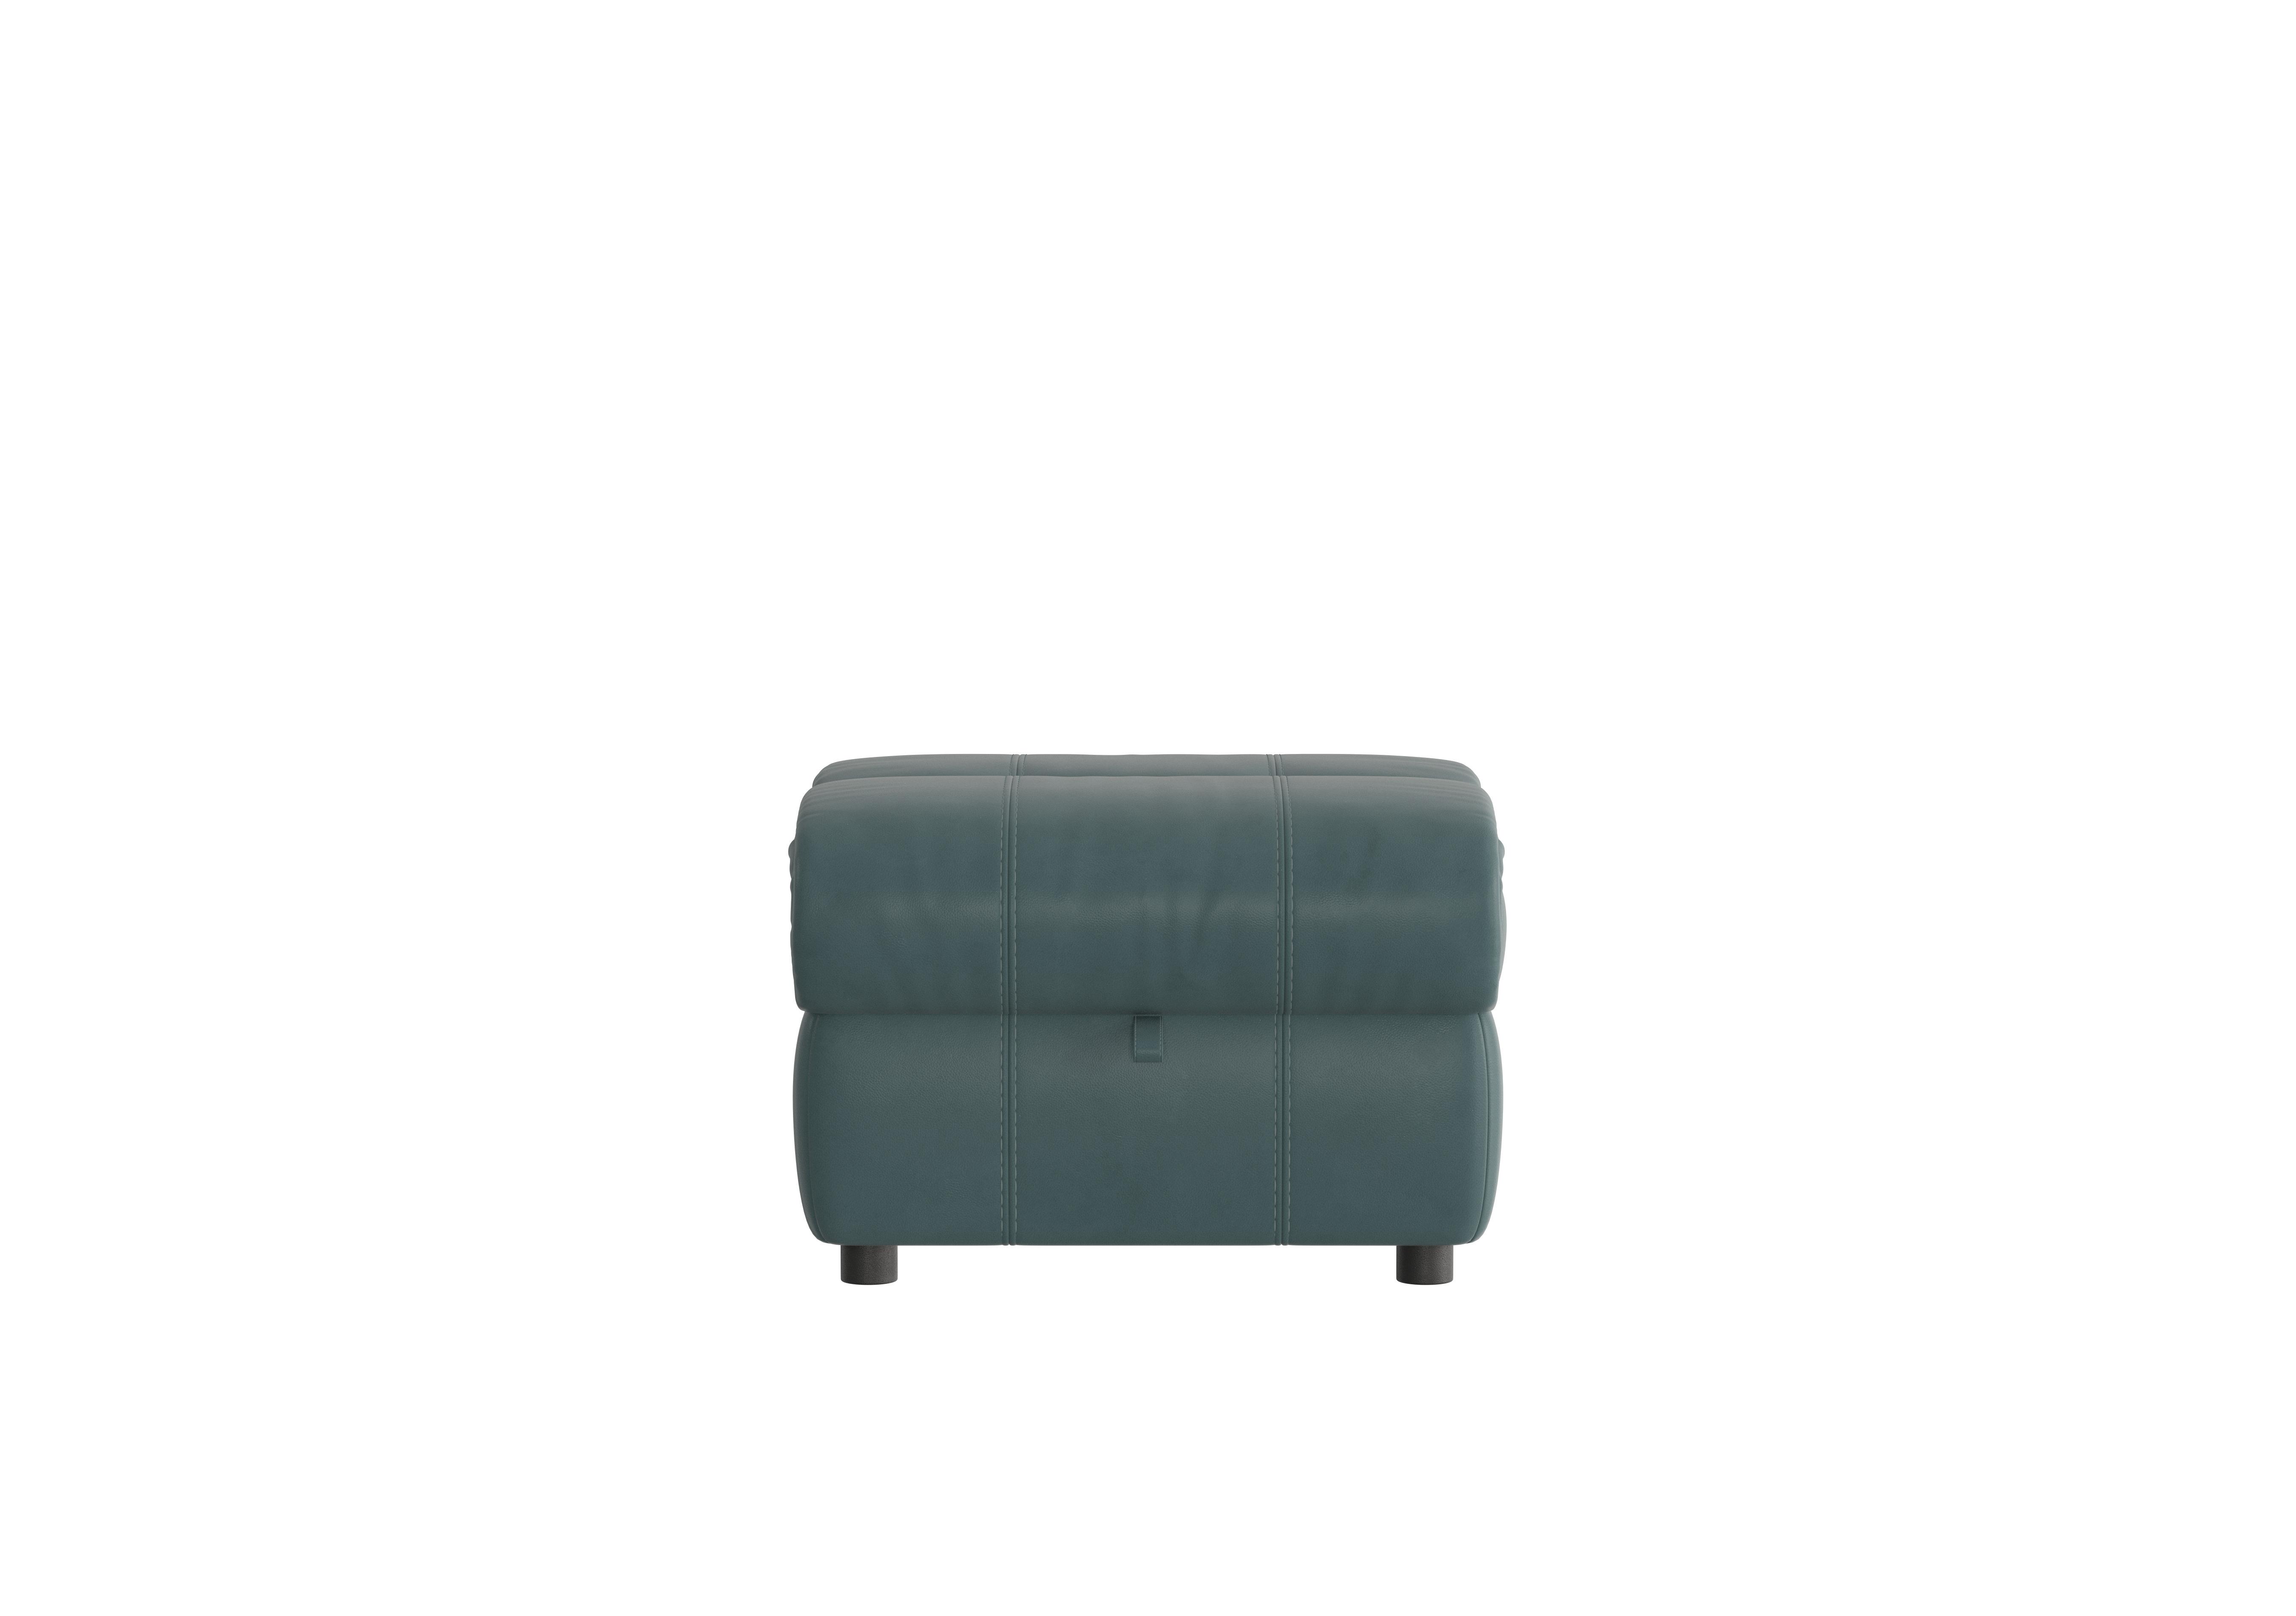 Link Leather Footstool in Bv-301e Lake Green on Furniture Village